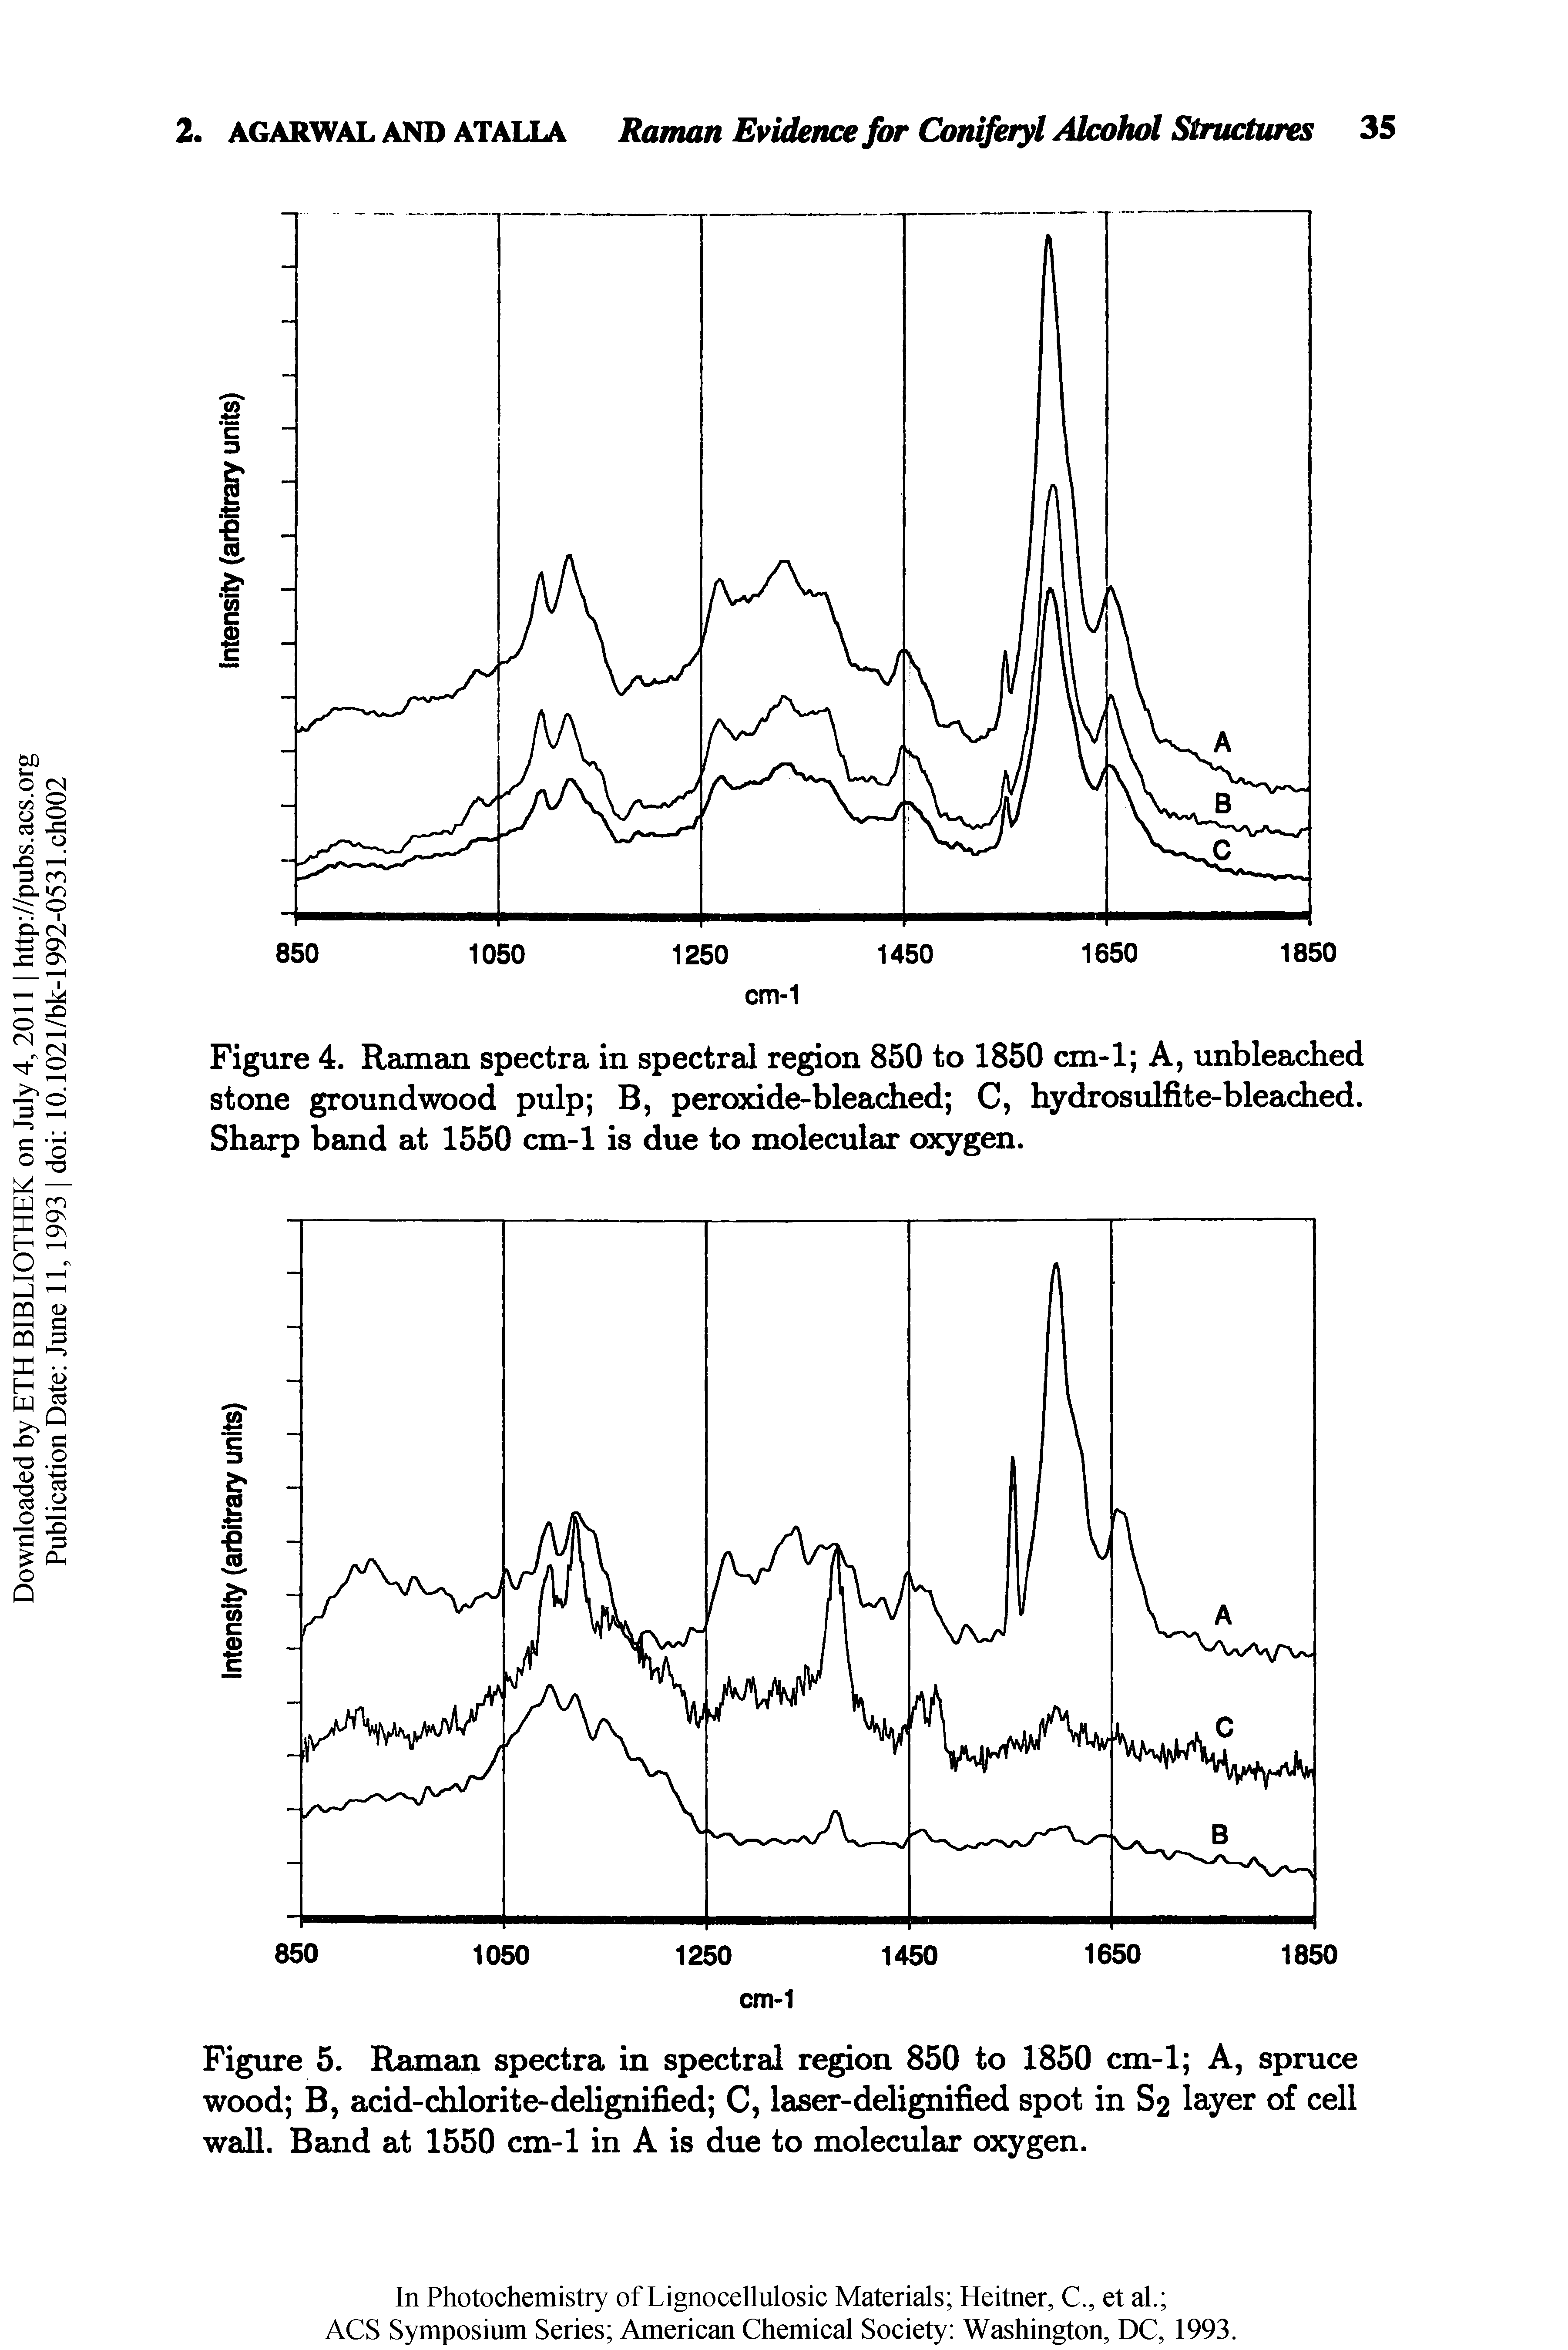 Figure 4. Raman spectra in spectral region 850 to 1850 cm-1 A, unbleached stone groundwood pulp B, peroxide-bleached C, hydrosulfite-bleached. Sharp band at 1550 cm-1 is due to molecular oxygen.